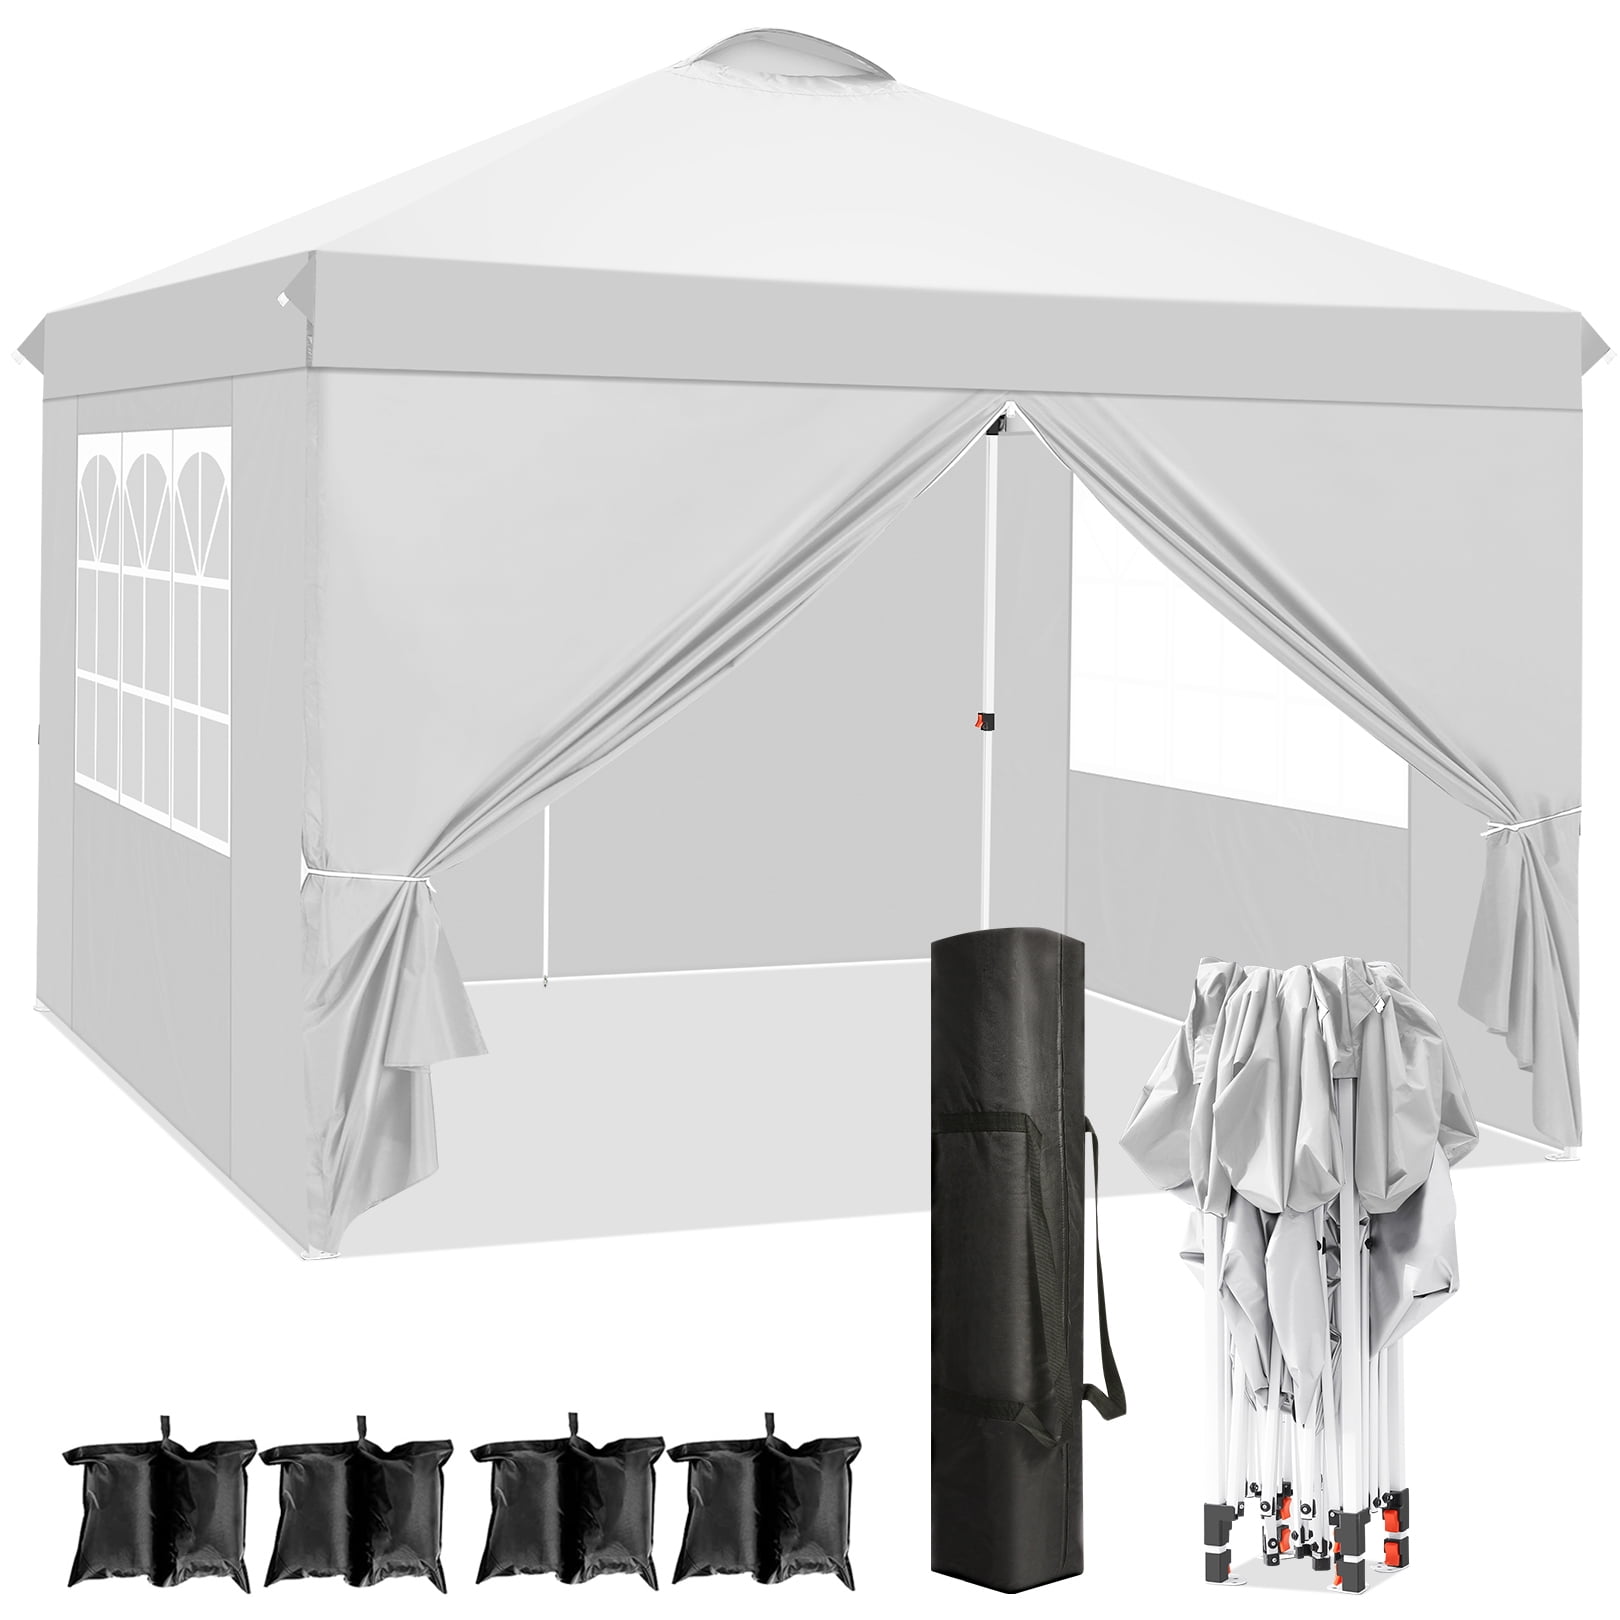 10'x10' Pop Up Outdoor Instant Party Canopy, Air Vent on The Top, 4 Removable Sidewalls, 3 Adjustable Height with Carrying Bag, 4 Ropes & 8 Stakes & 4 Sandbags, White - Walmart.com